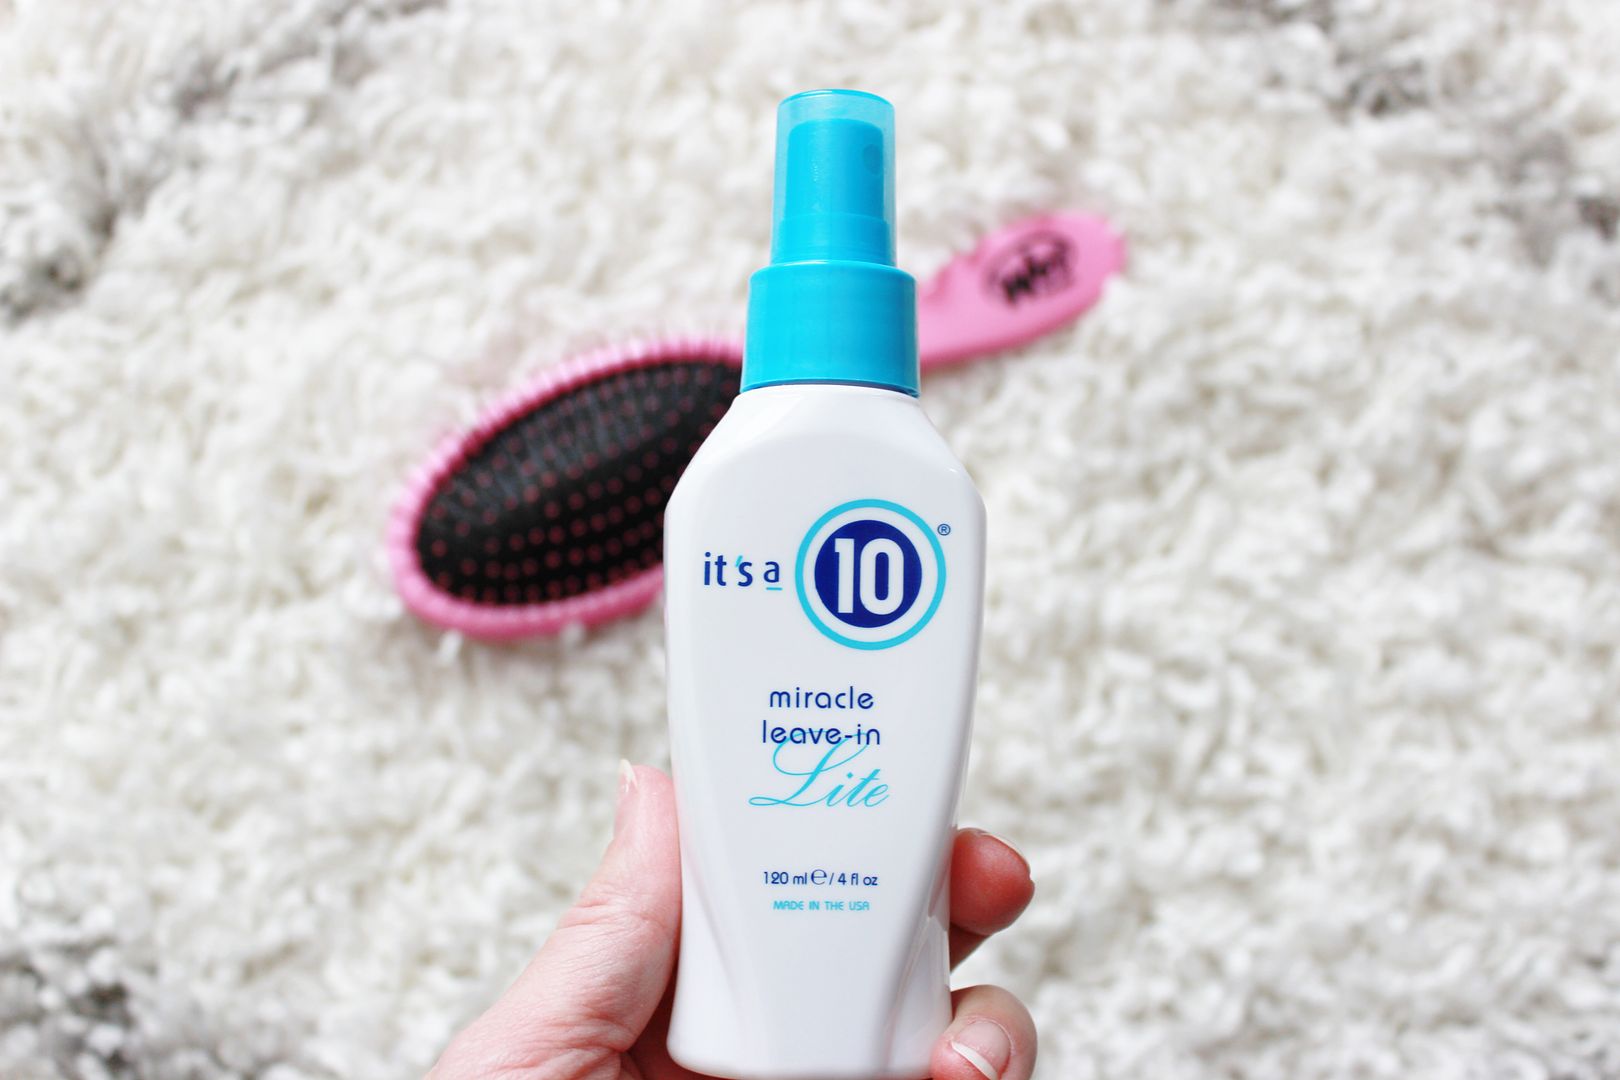 It's A 10 Miracle Leave-In Spray Detangle Hair